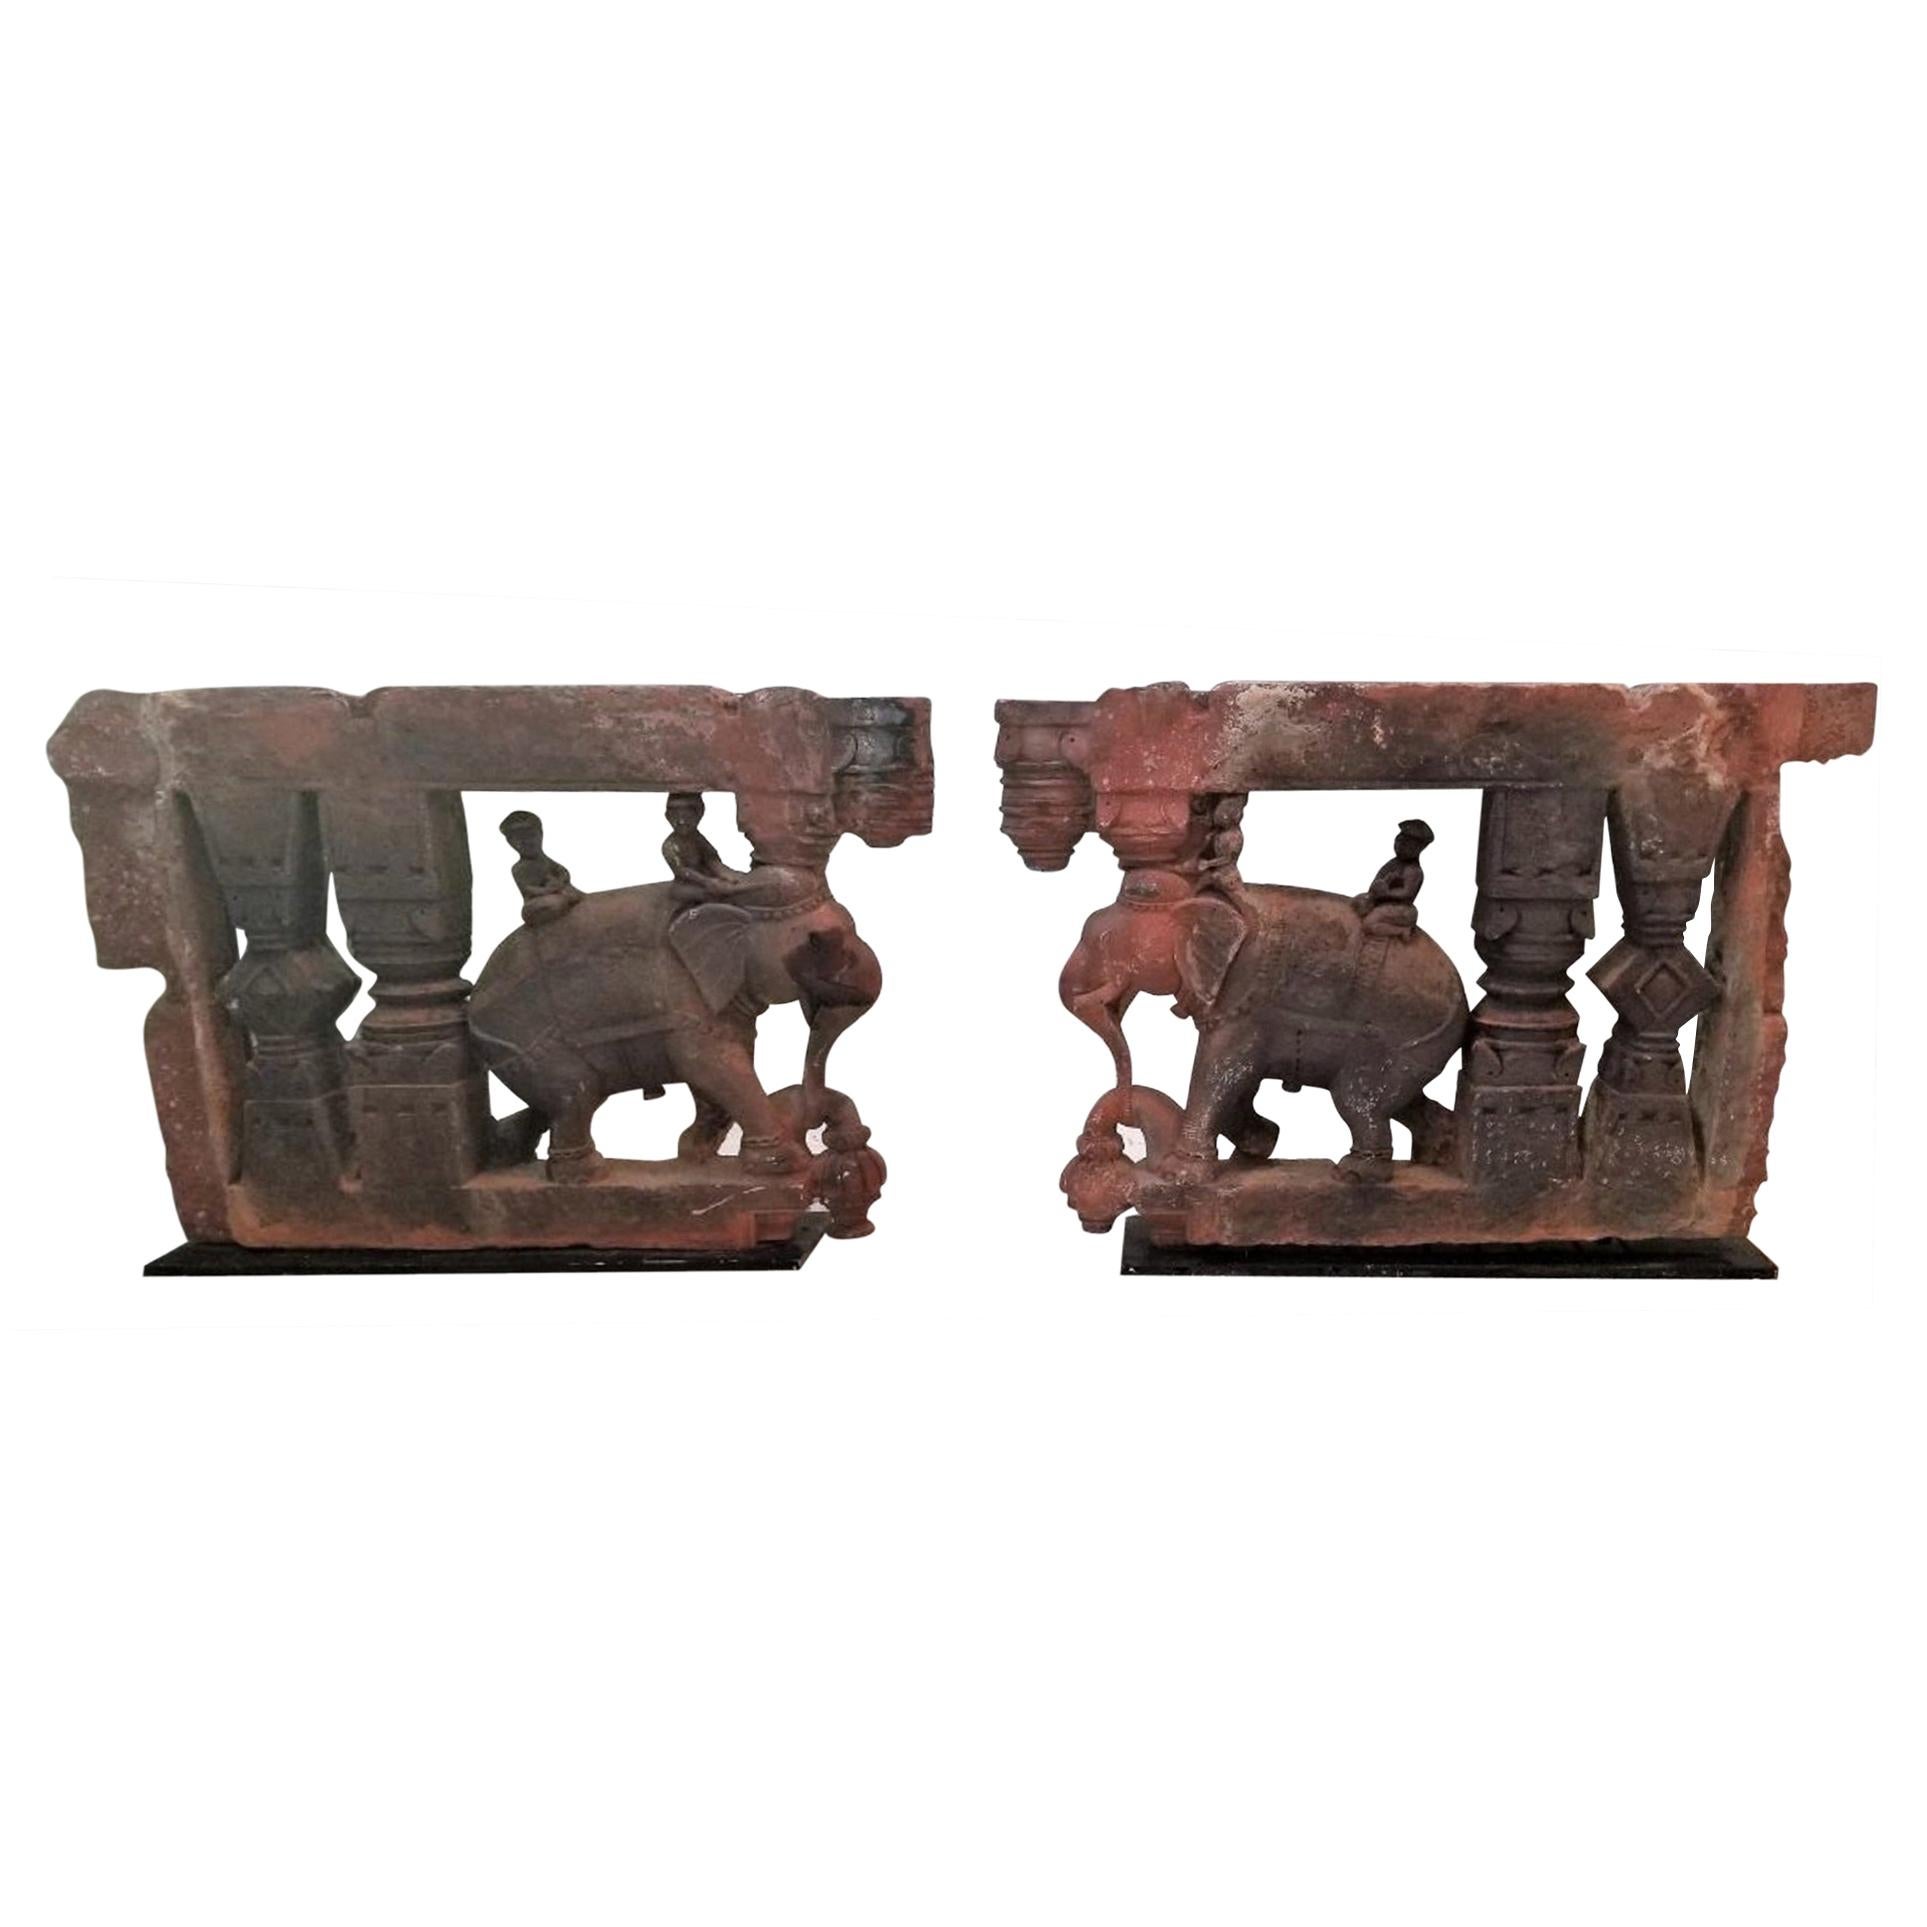 17C SE Asian Indian Pair of Brackets with Elephants and Mahuts